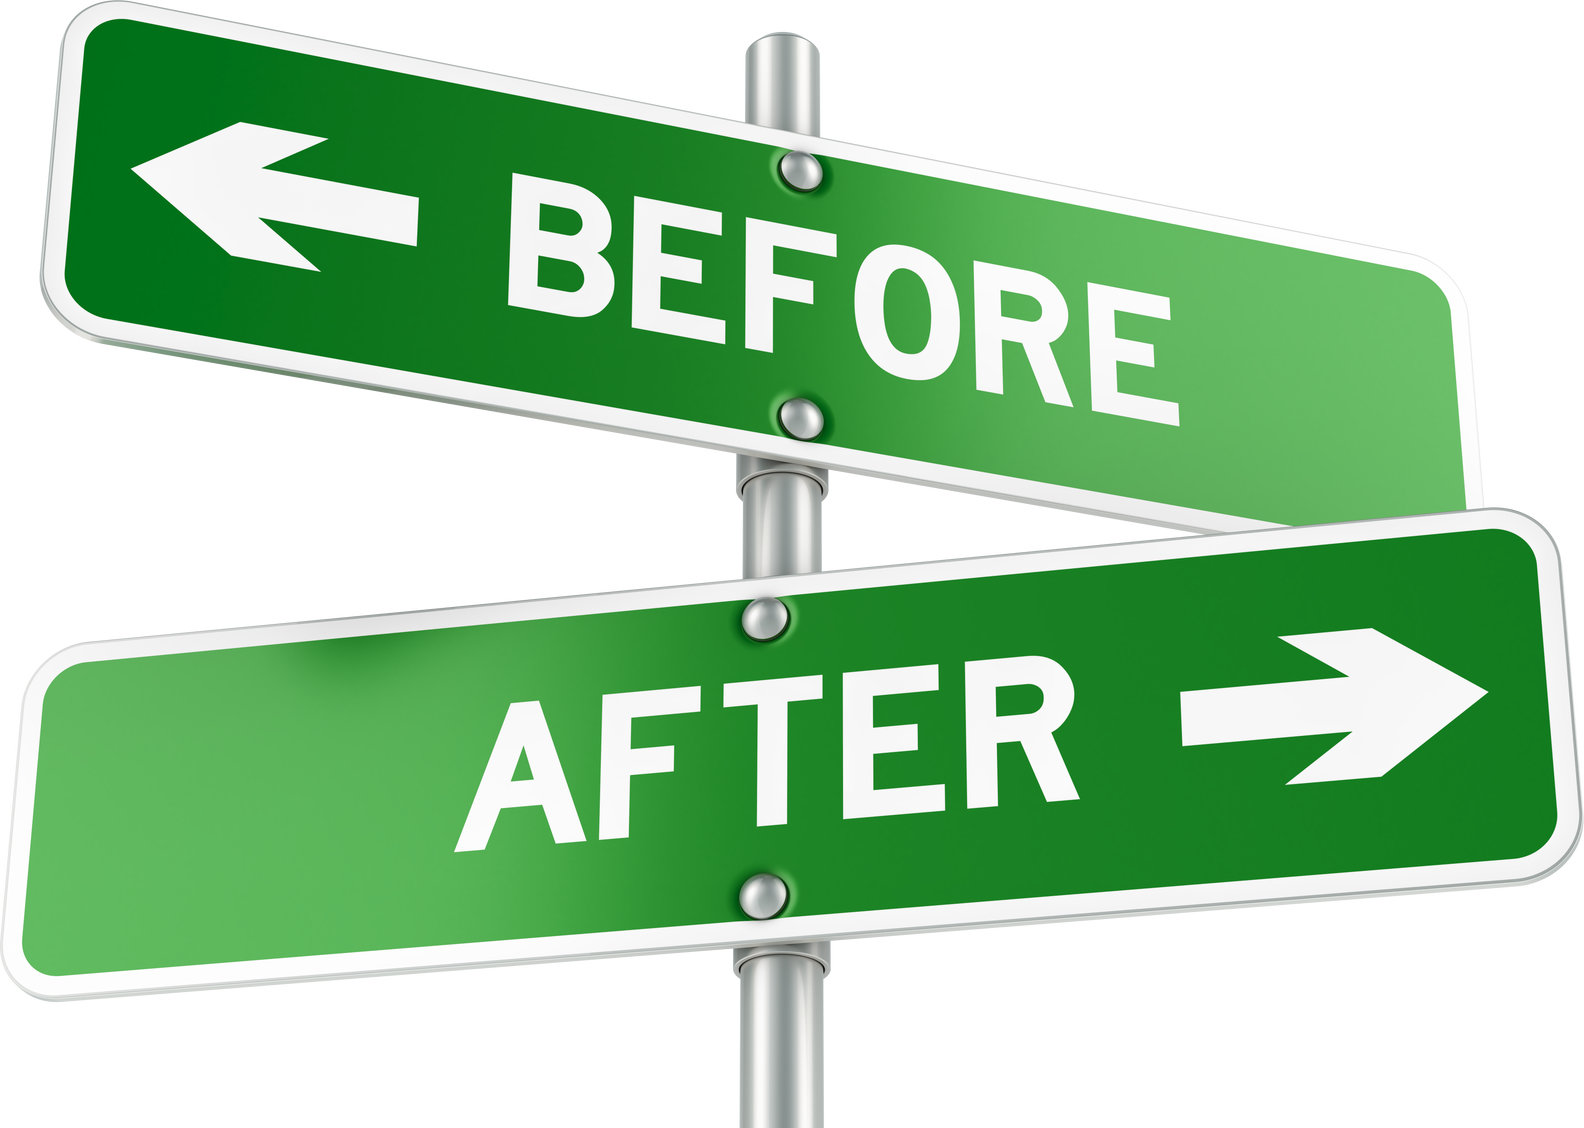 After and Before directions. Opposite traffic sign, 3D rendering isolated on transparent background